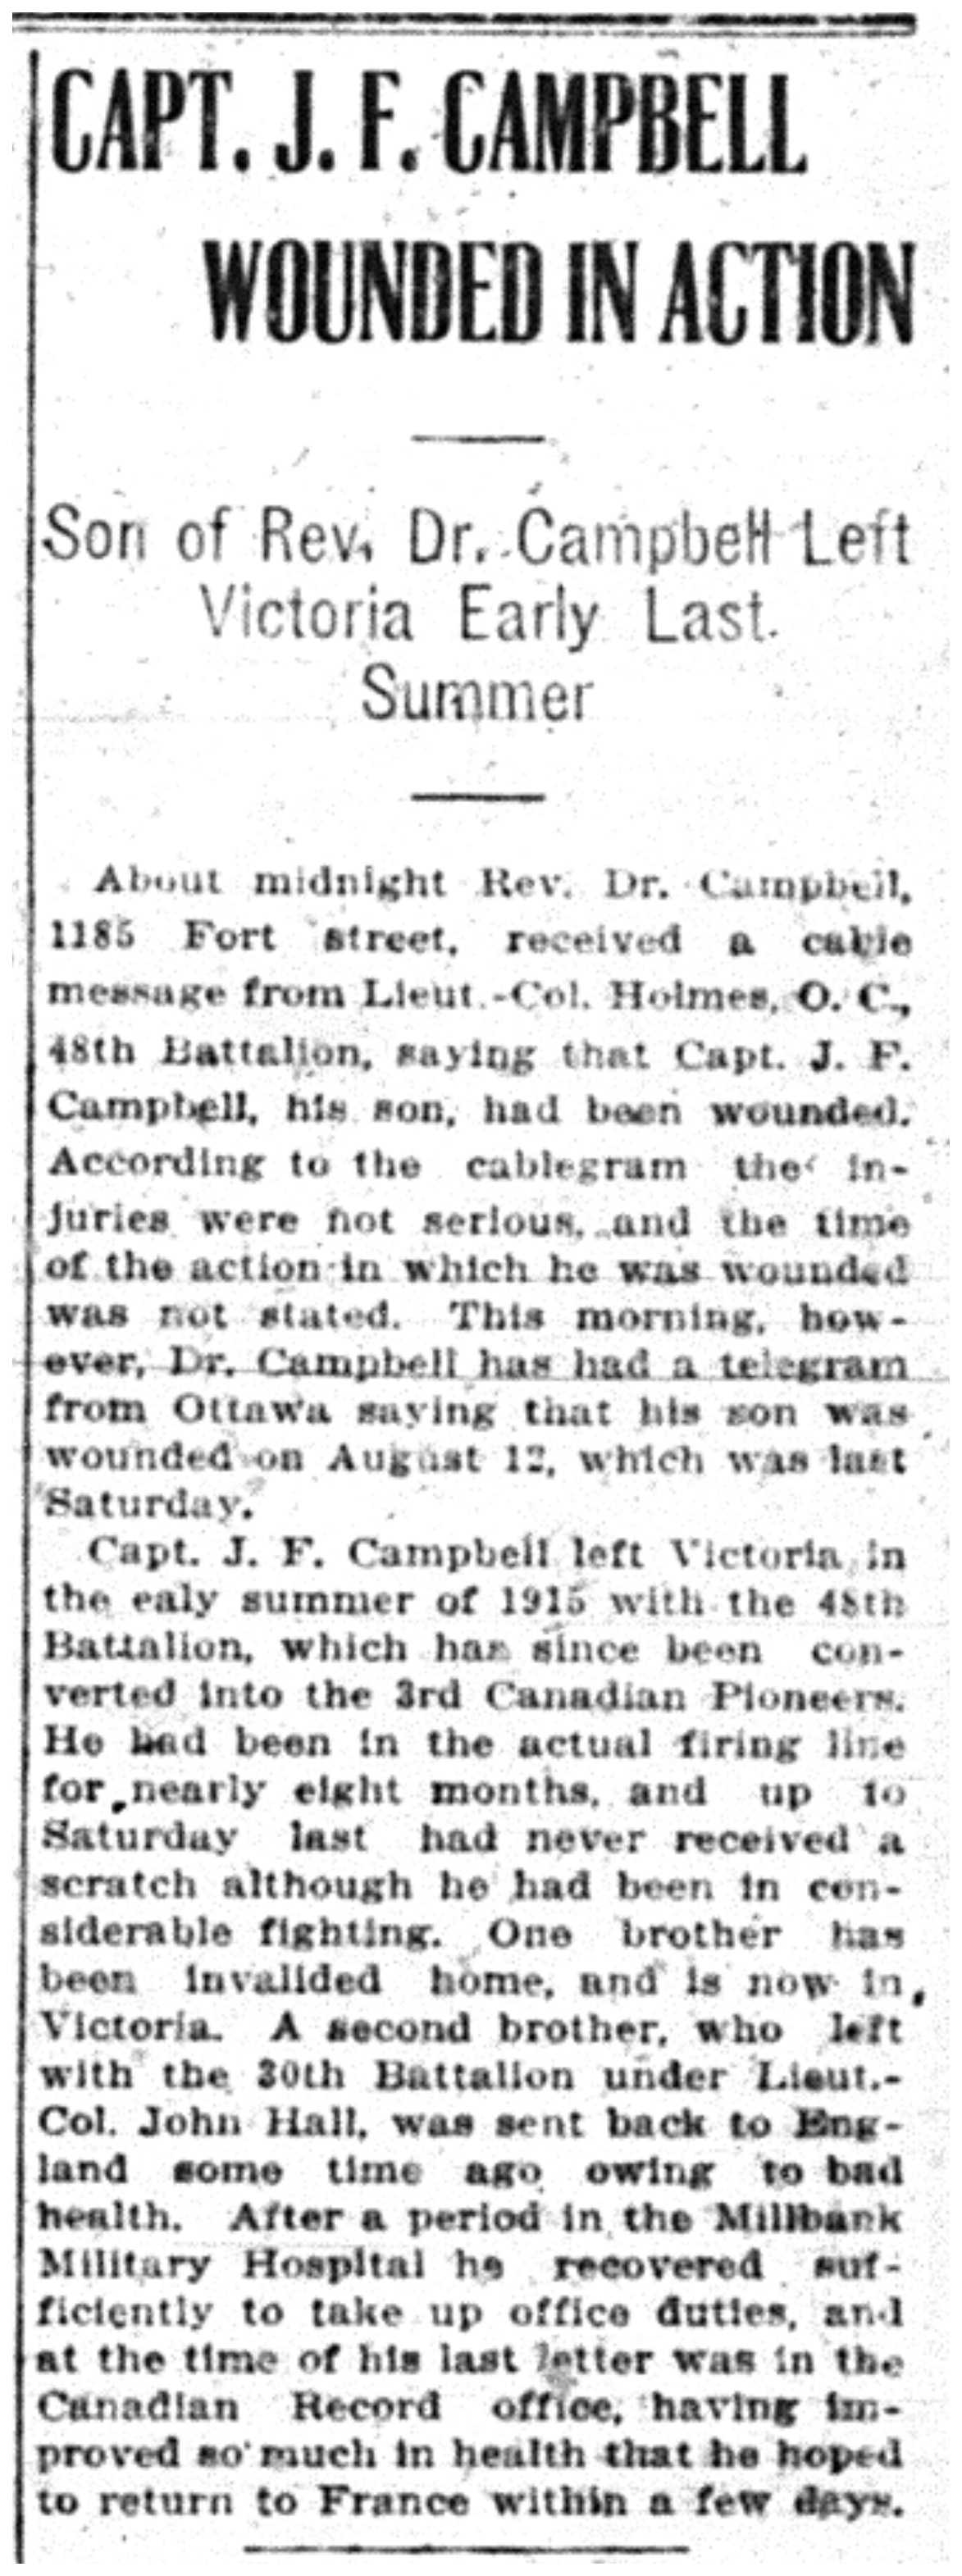 Campbell Wounded